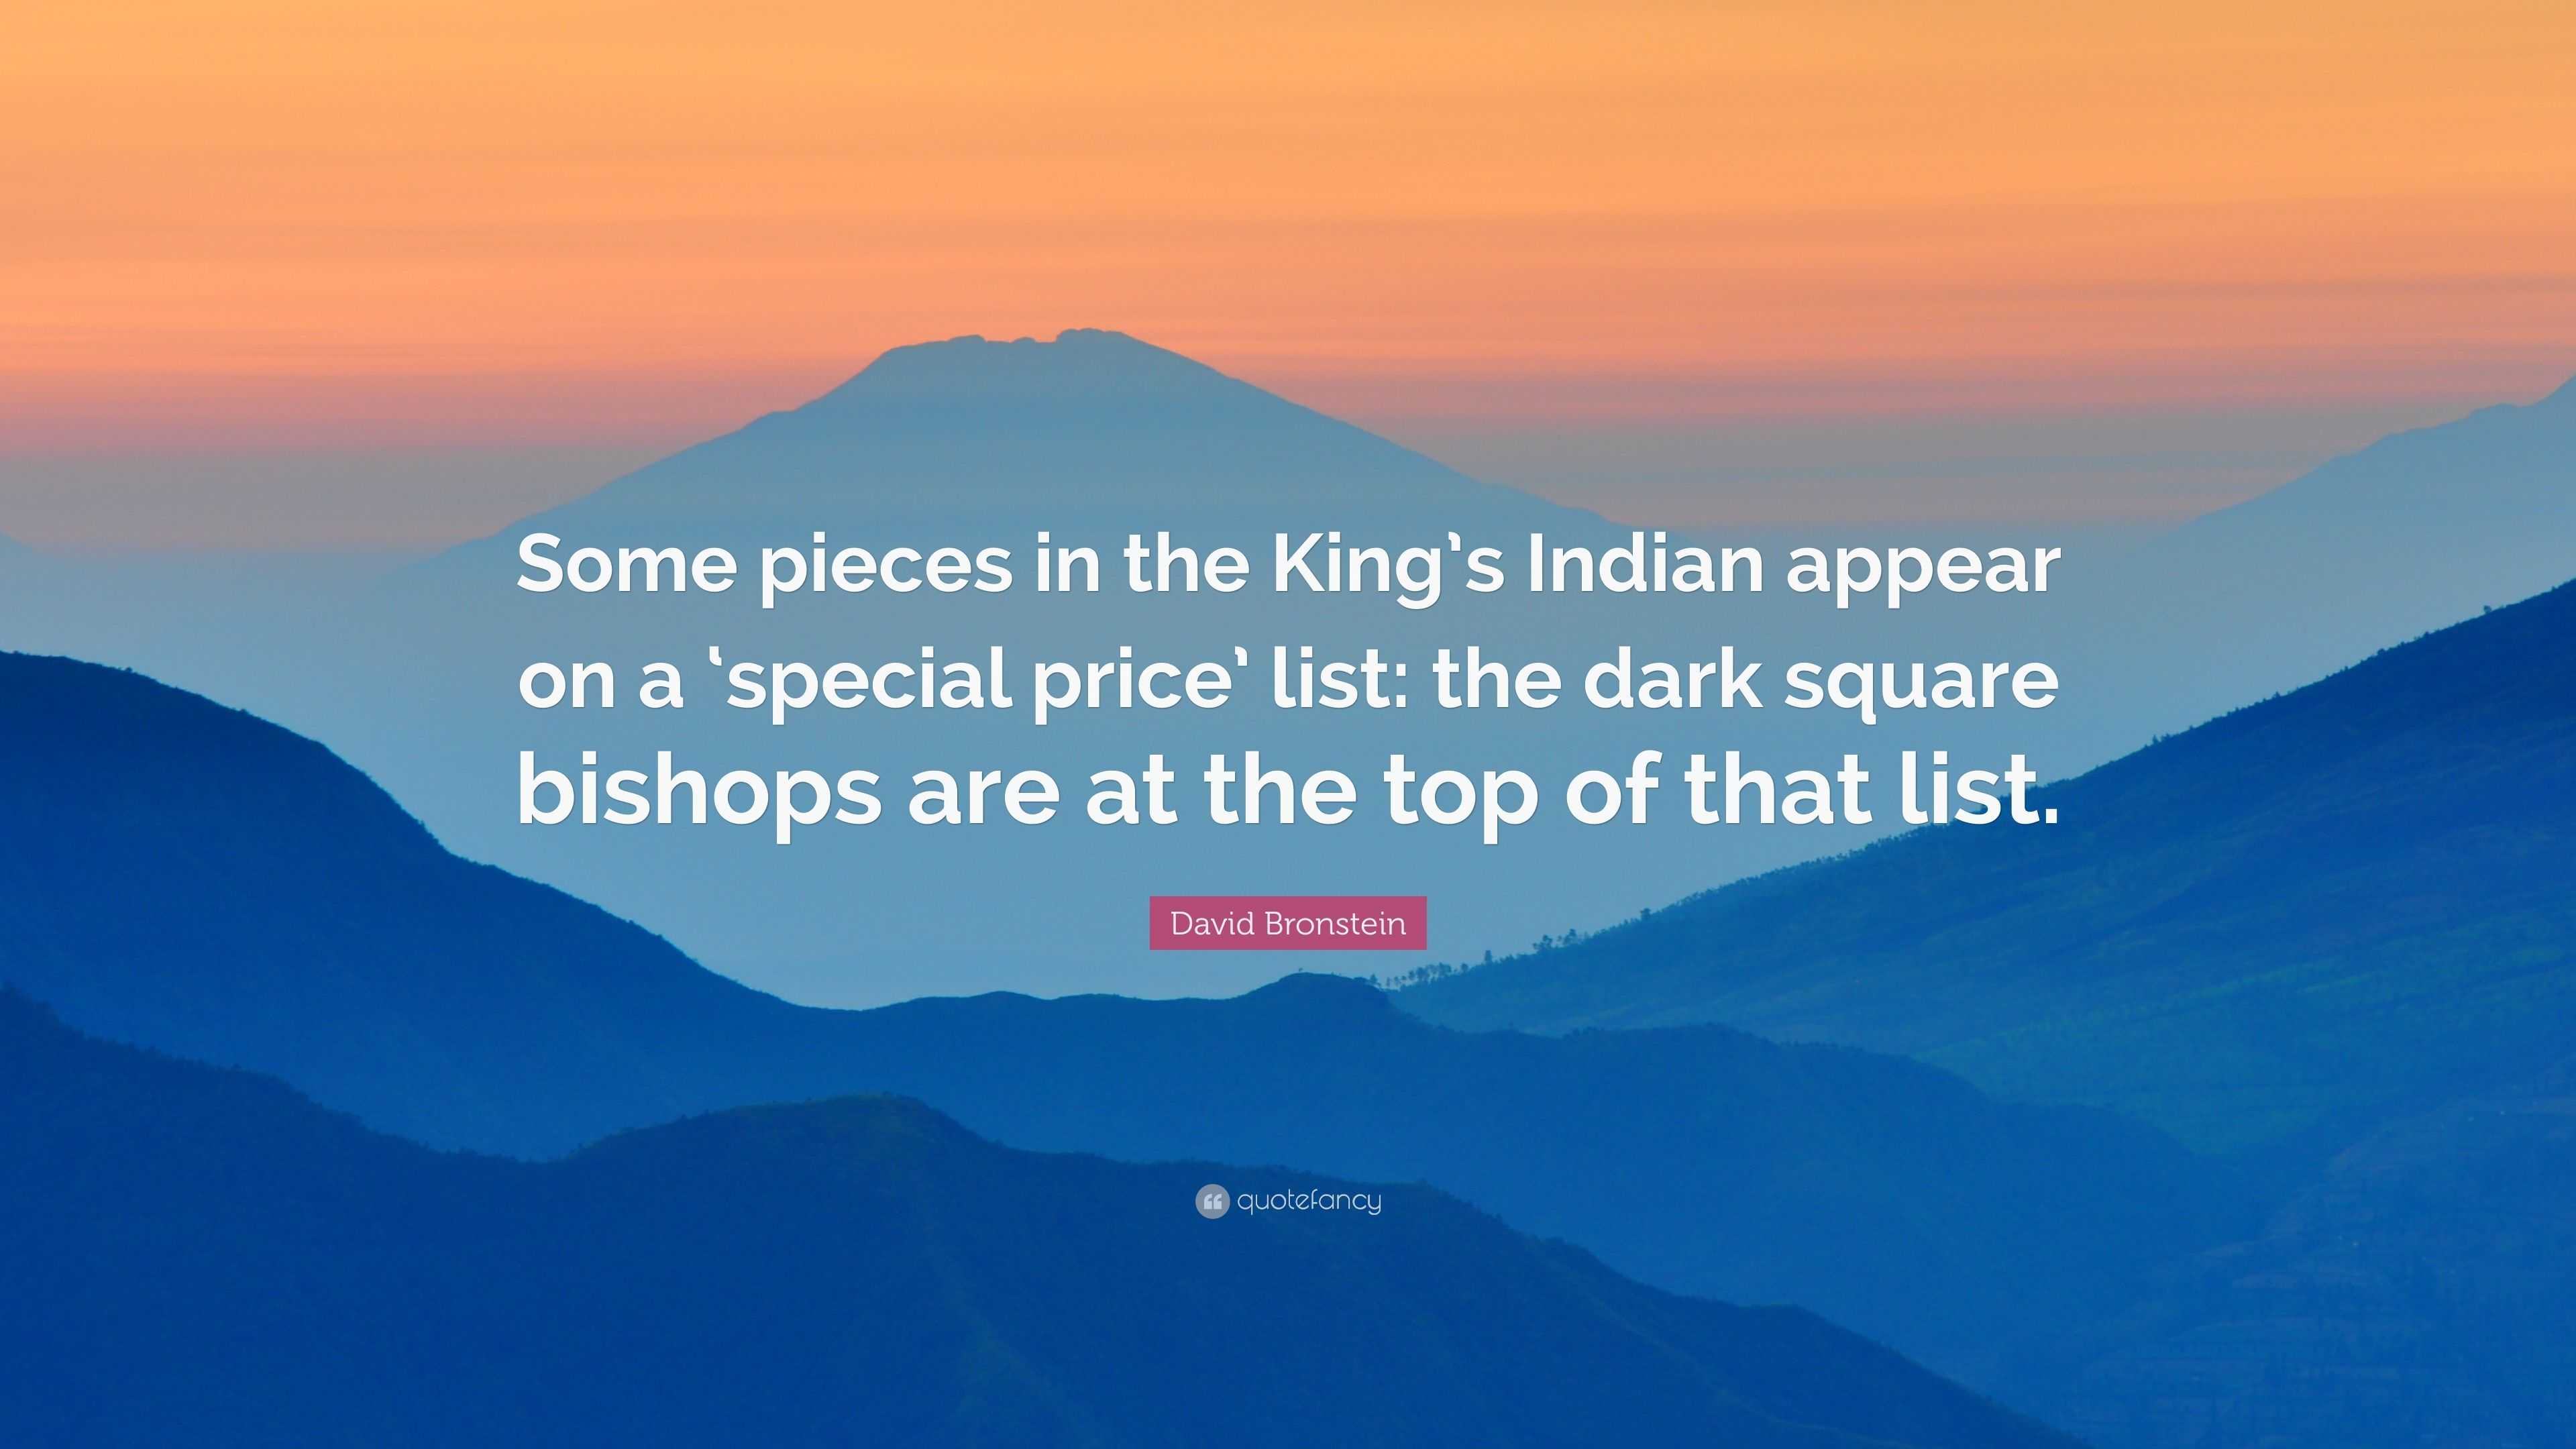 David Bronstein Quote “Some pieces in the King’s Indian appear on a